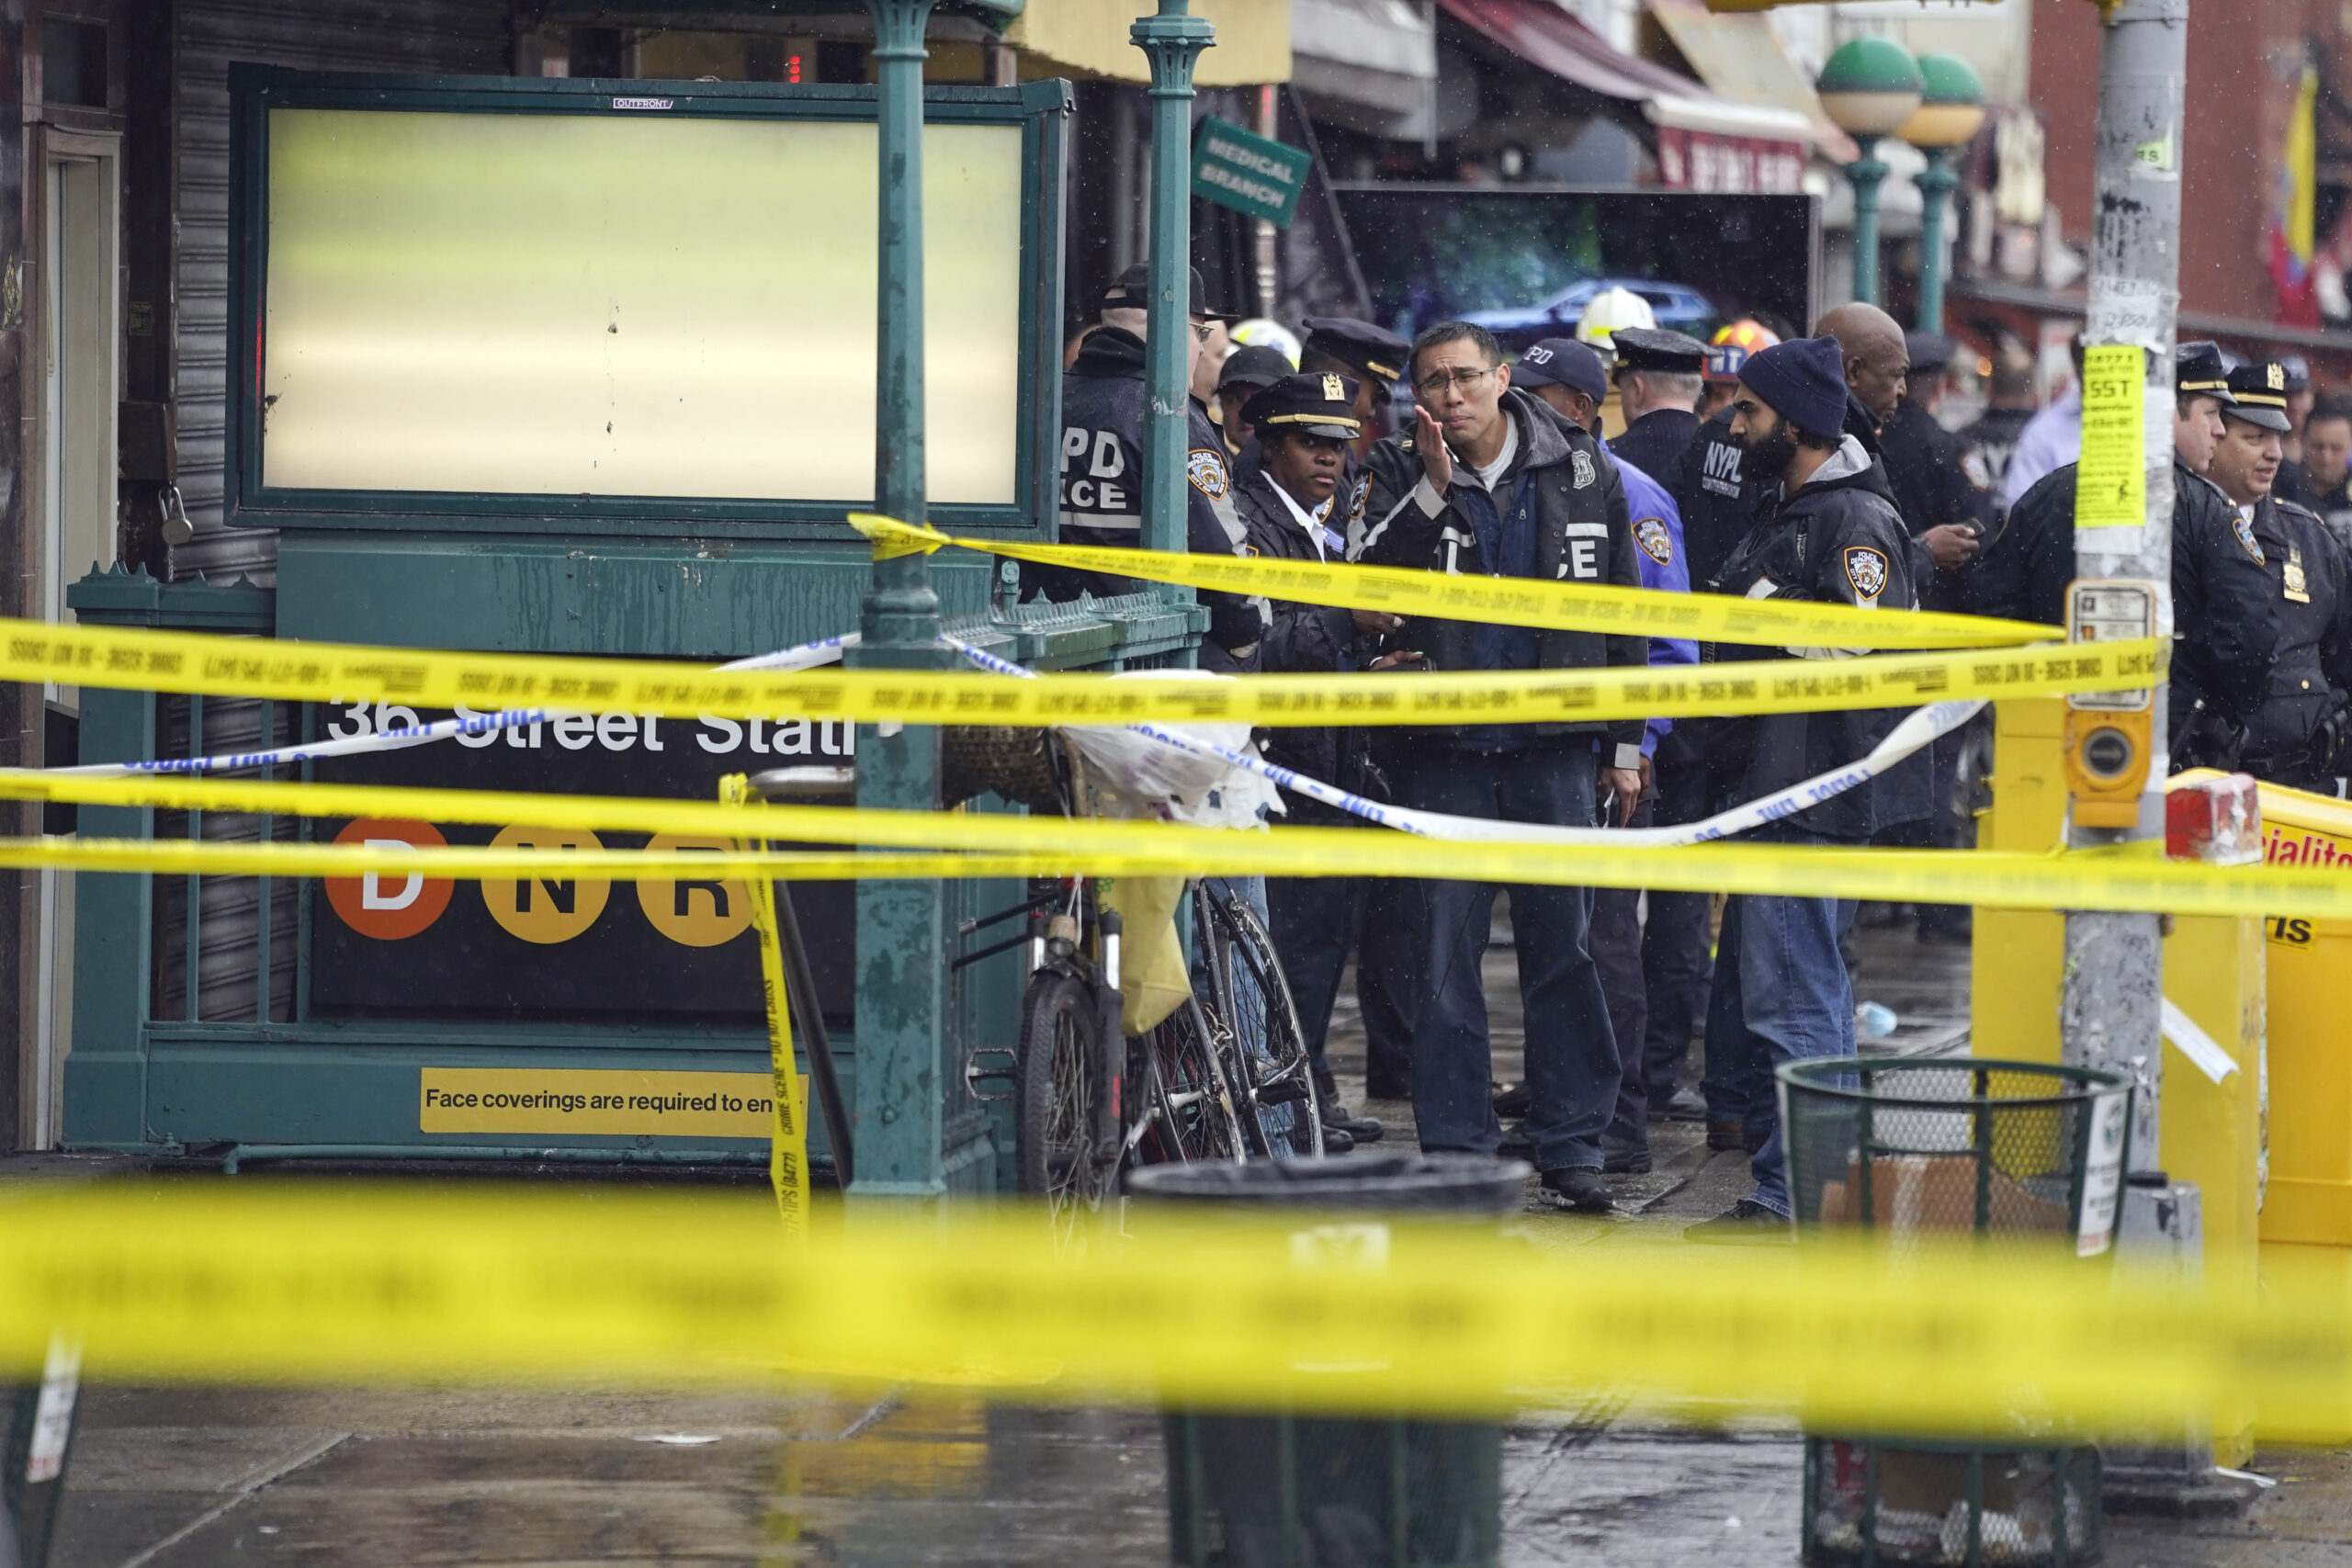 New York City Police Department personnel gather at the entrance to a subway stop in the Brooklyn borough of New York, Tuesday, April 12, 2022. Multiple people were shot and injured Tuesday at a subway station in New York City during a morning rush hour attack that left wounded commuters bleeding on a train platform. (AP Photo/John Minchillo)